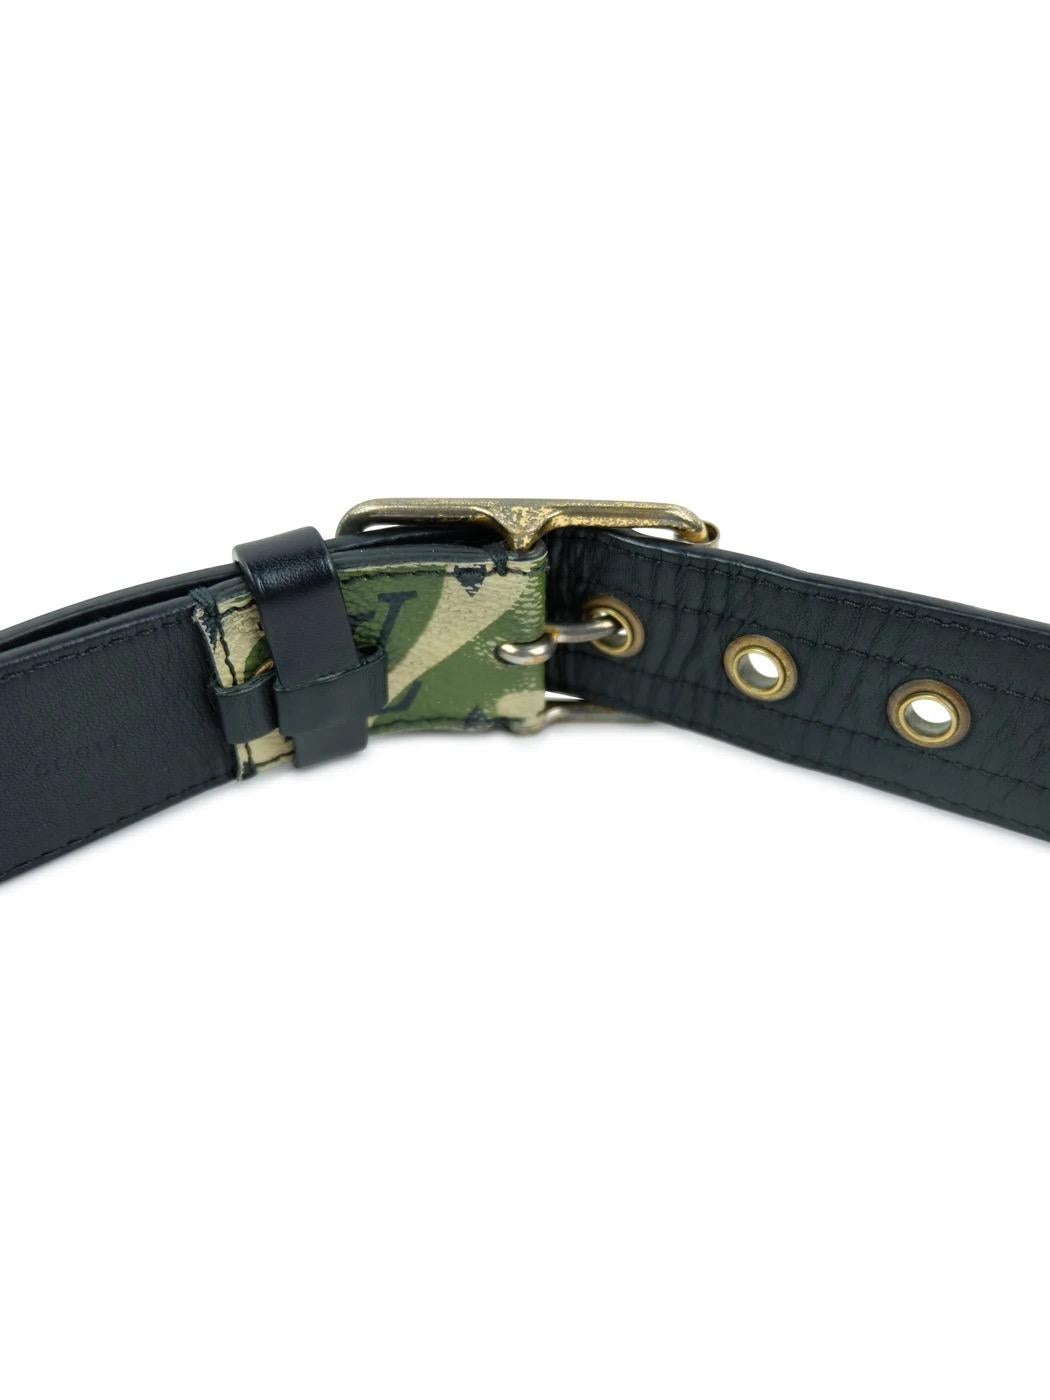 Probably the most iconic luxury collaboration of all time, the legendary Takashi Murakami and Louis Vuitton with their camo monogram collection. This is the center piece of the accessories, a stunning camomonogram belt.

Size 90, fits 27-31